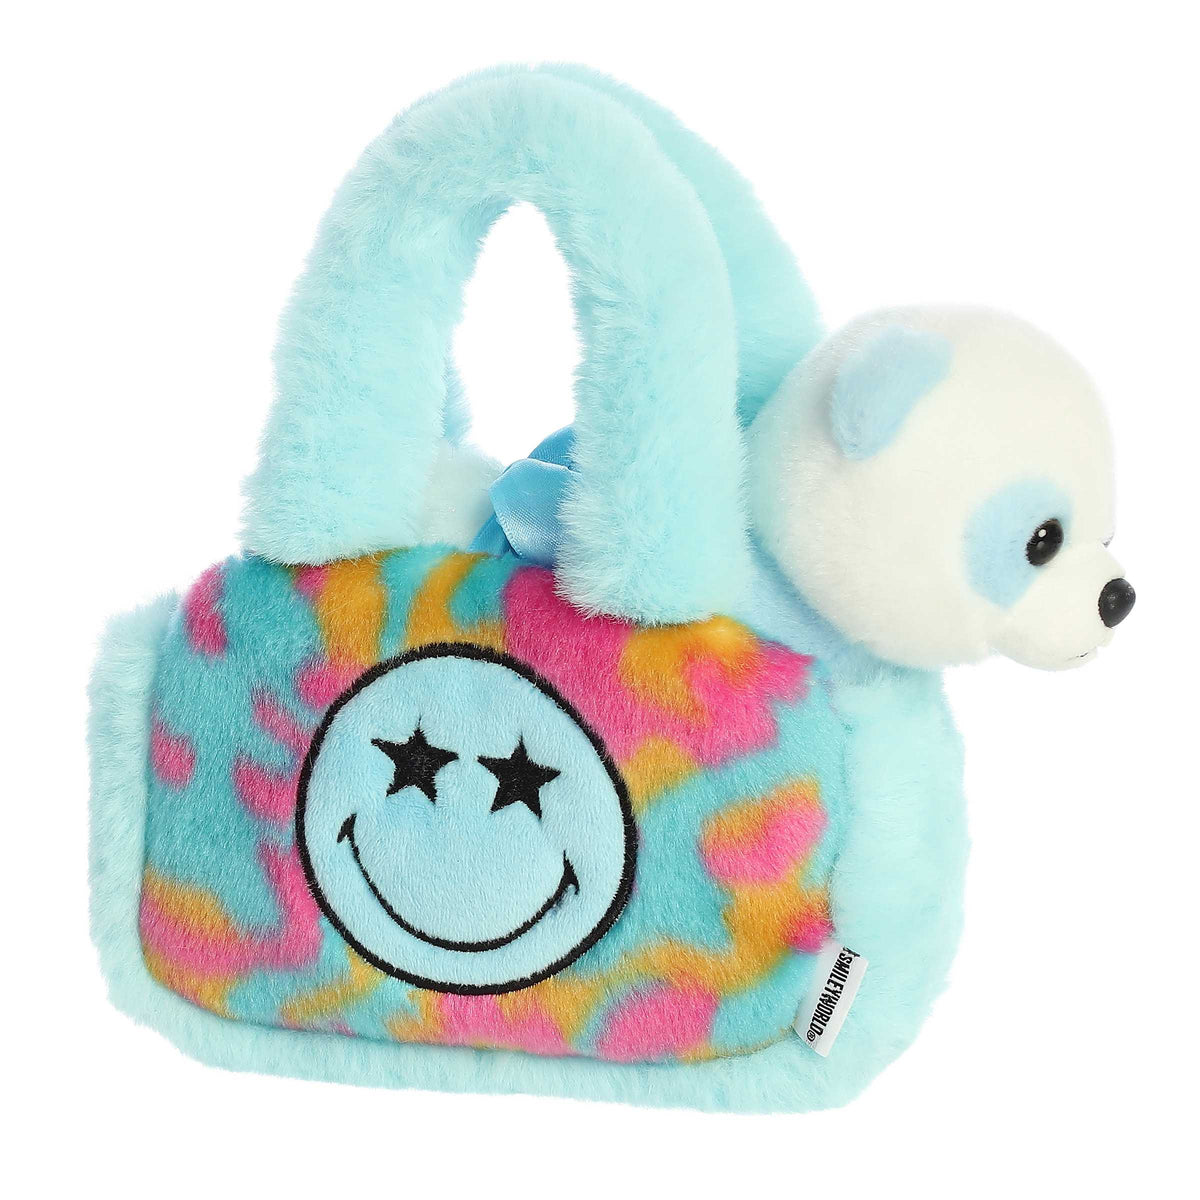 Star Eyes SmileyWorld Plush Carrier, colorful with star-filled eyes and includes a panda plush